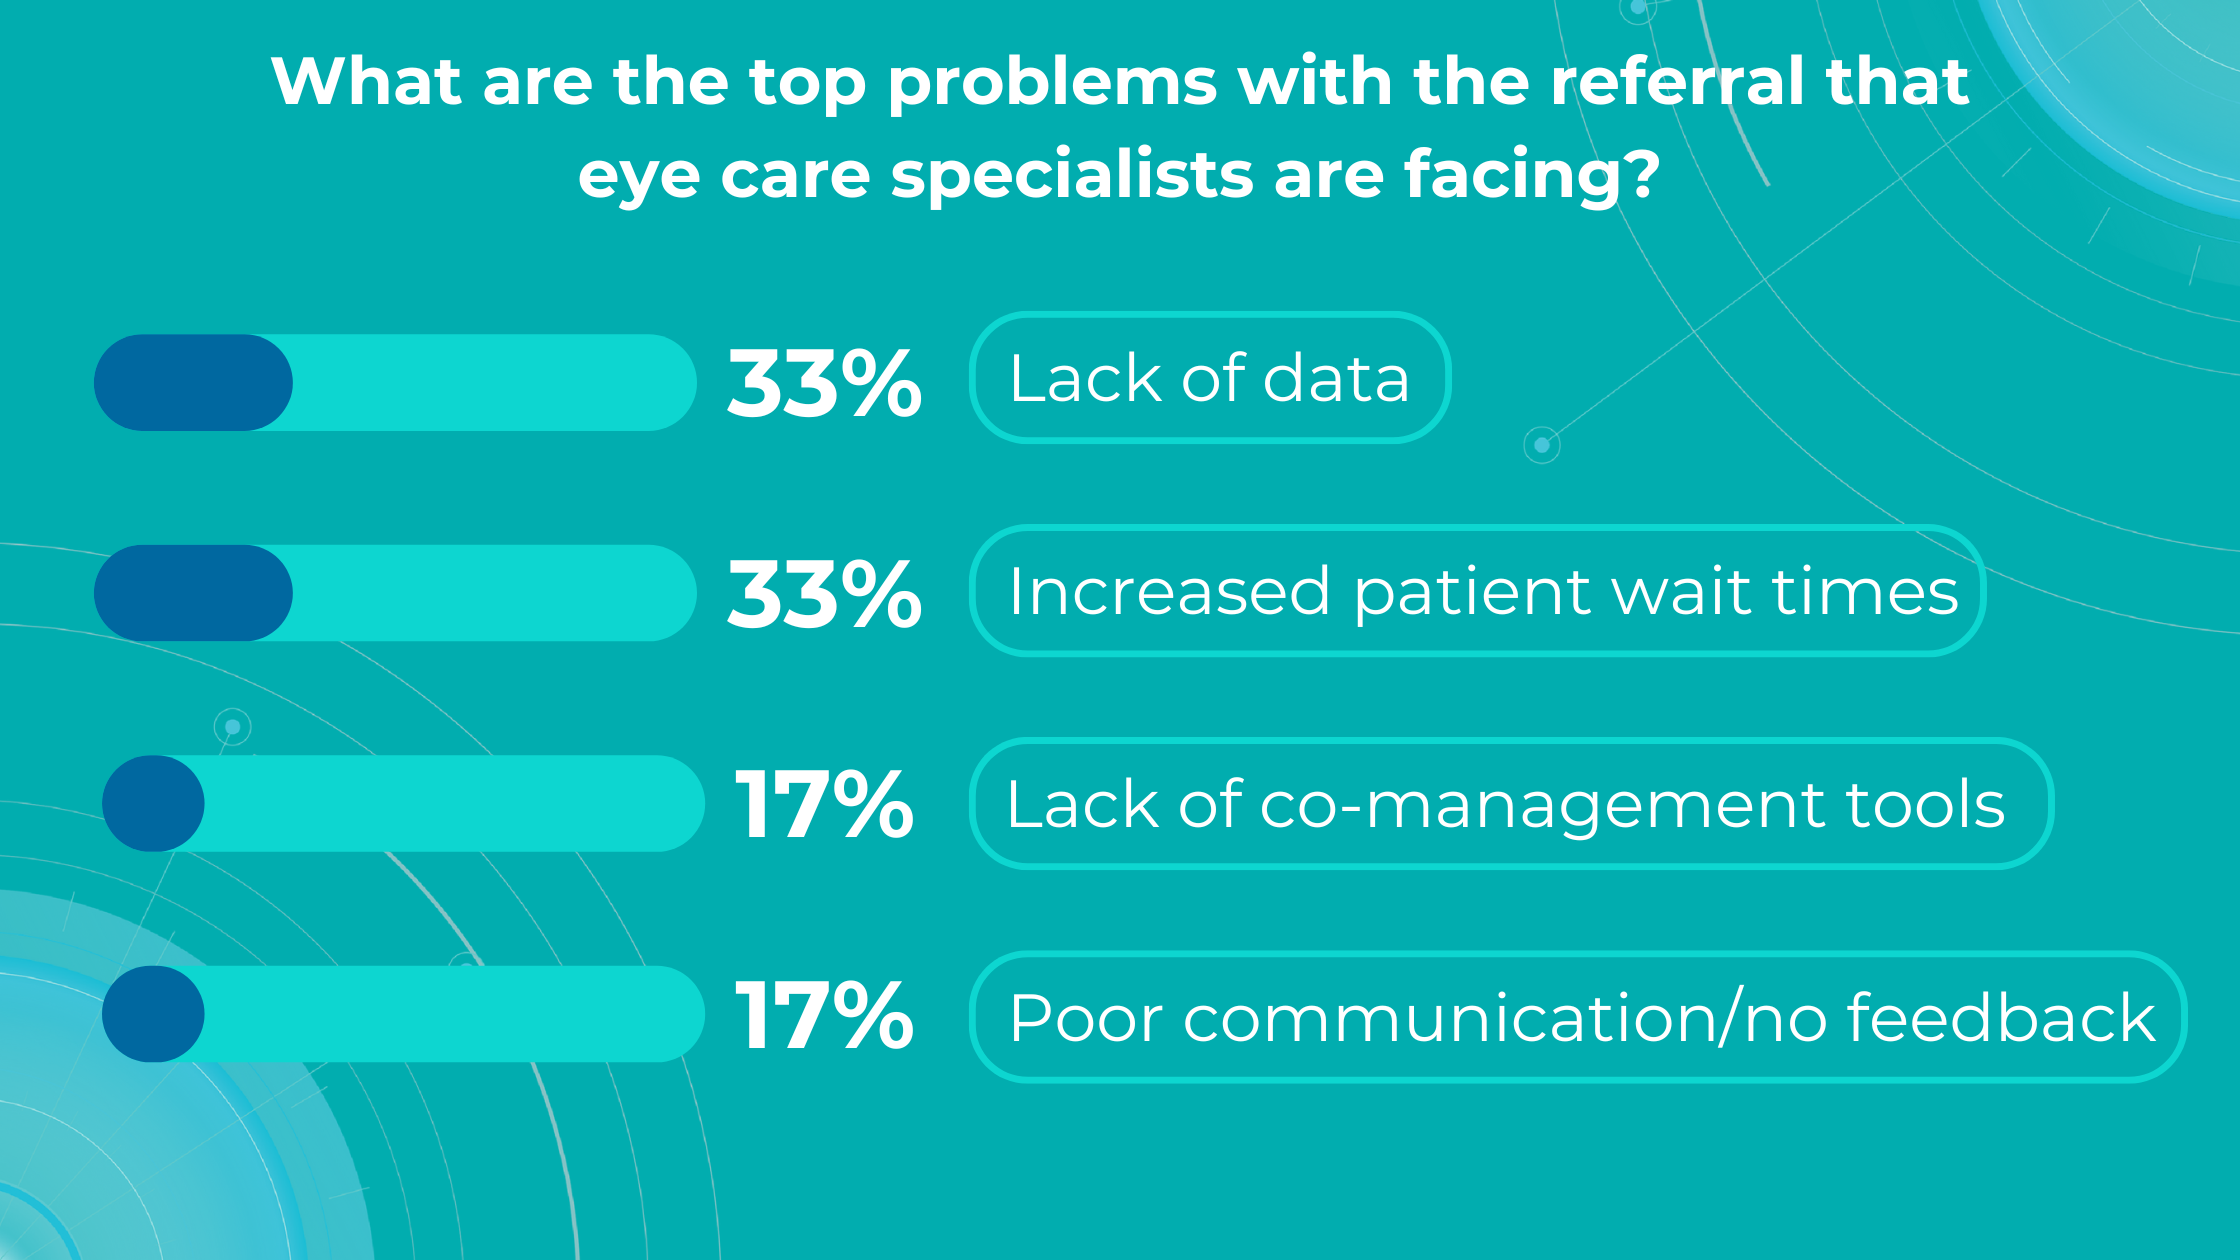 What are the top problems with the referral that eye care specialists are facing